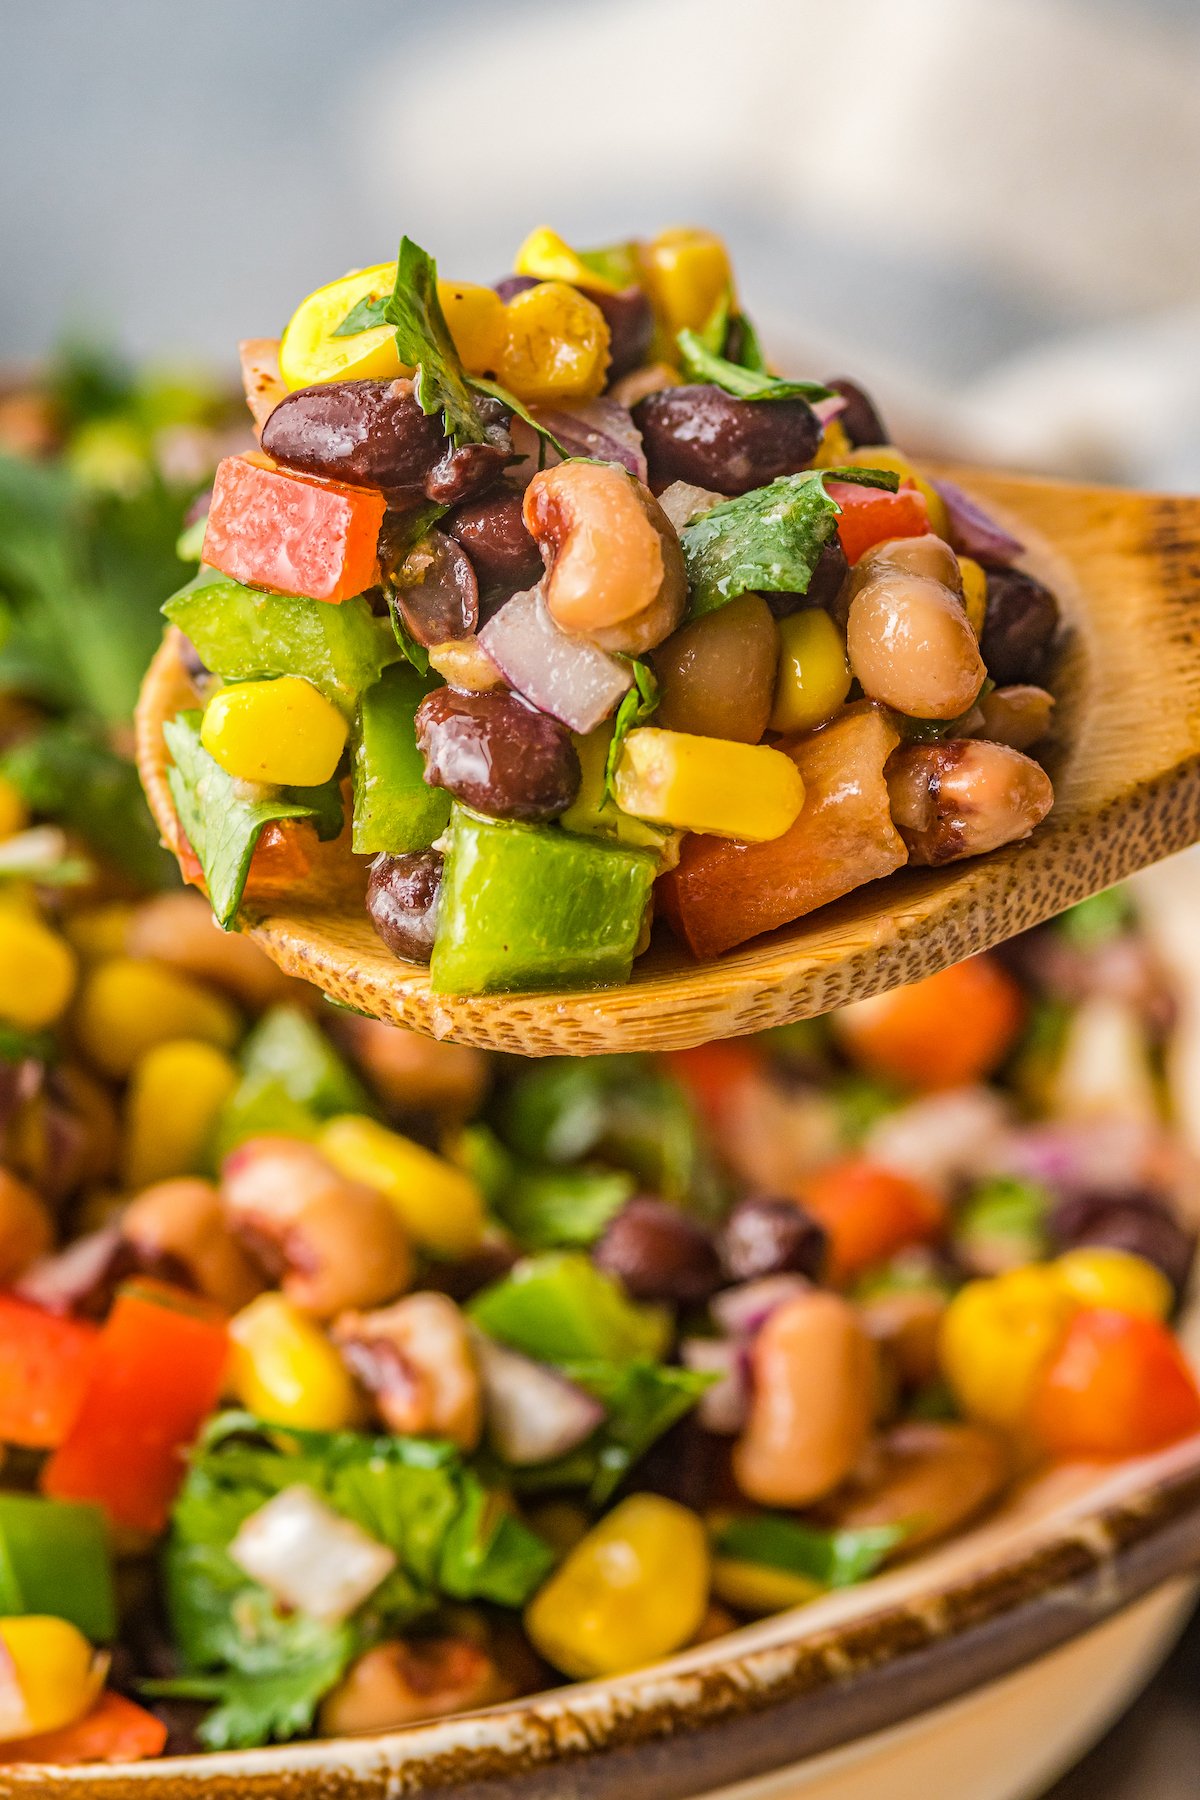 Peppers, corn, and beans, coated in vinaigrette.